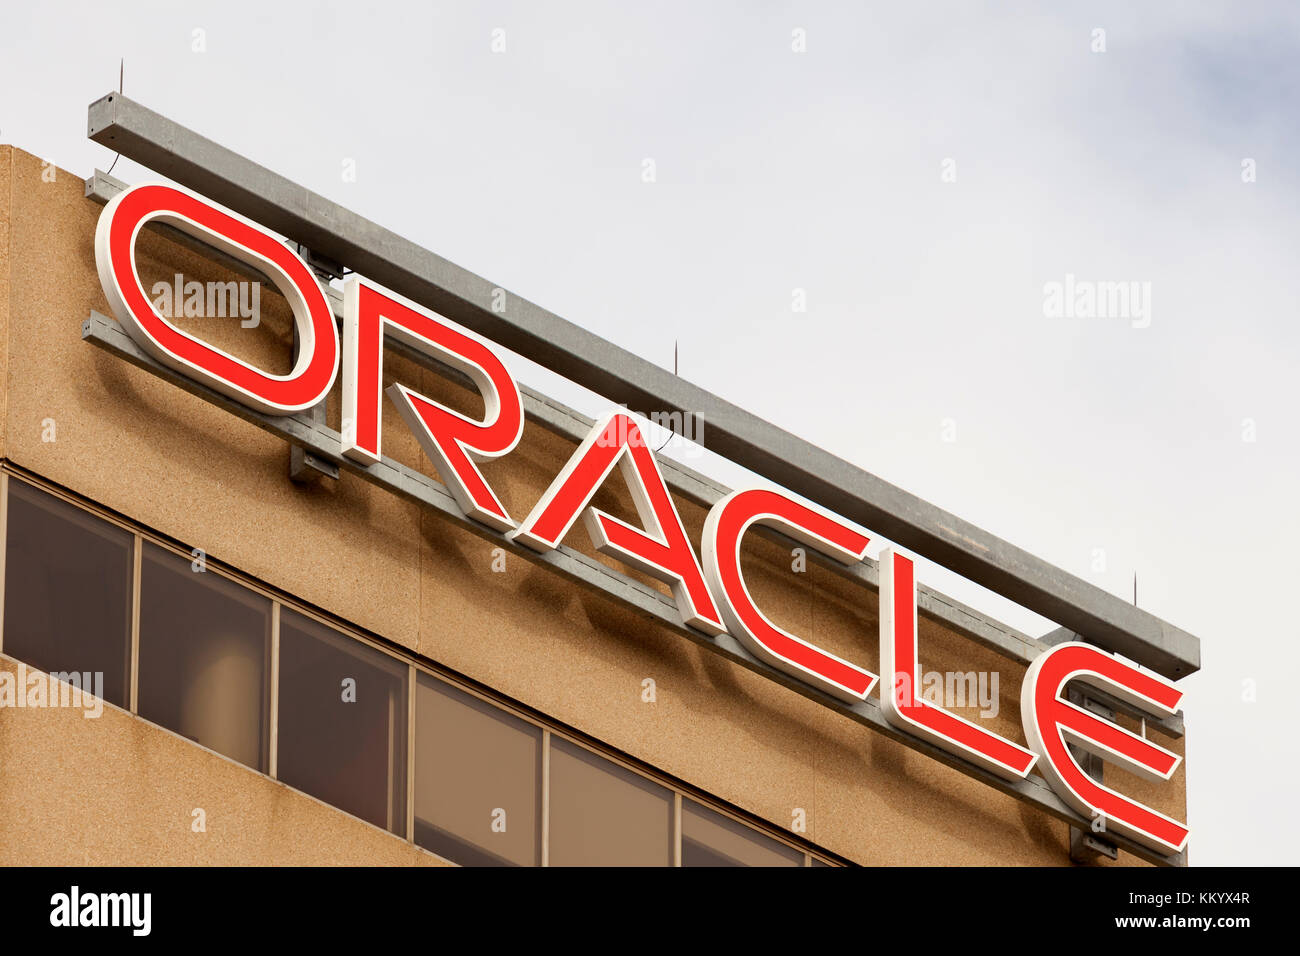 Toronto, Canada - Oct 21, 2017: The Oracle company office in the city of Toronto, Canada Stock Photo